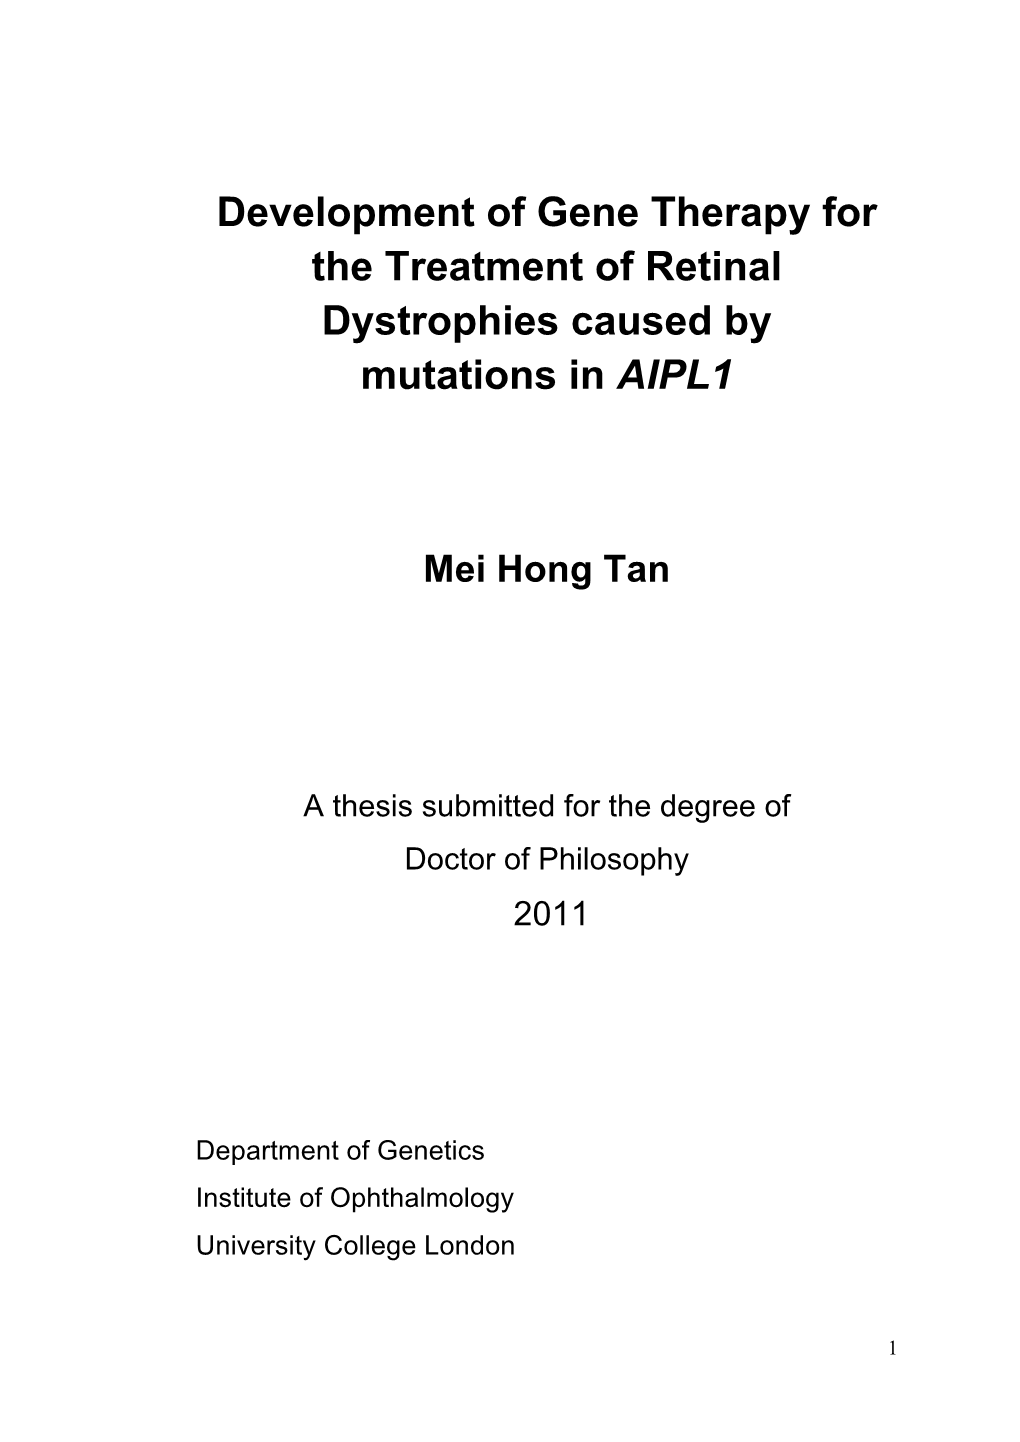 Development of Gene Therapy for the Treatment of Retinal Dystrophies Caused by Mutations in AIPL1